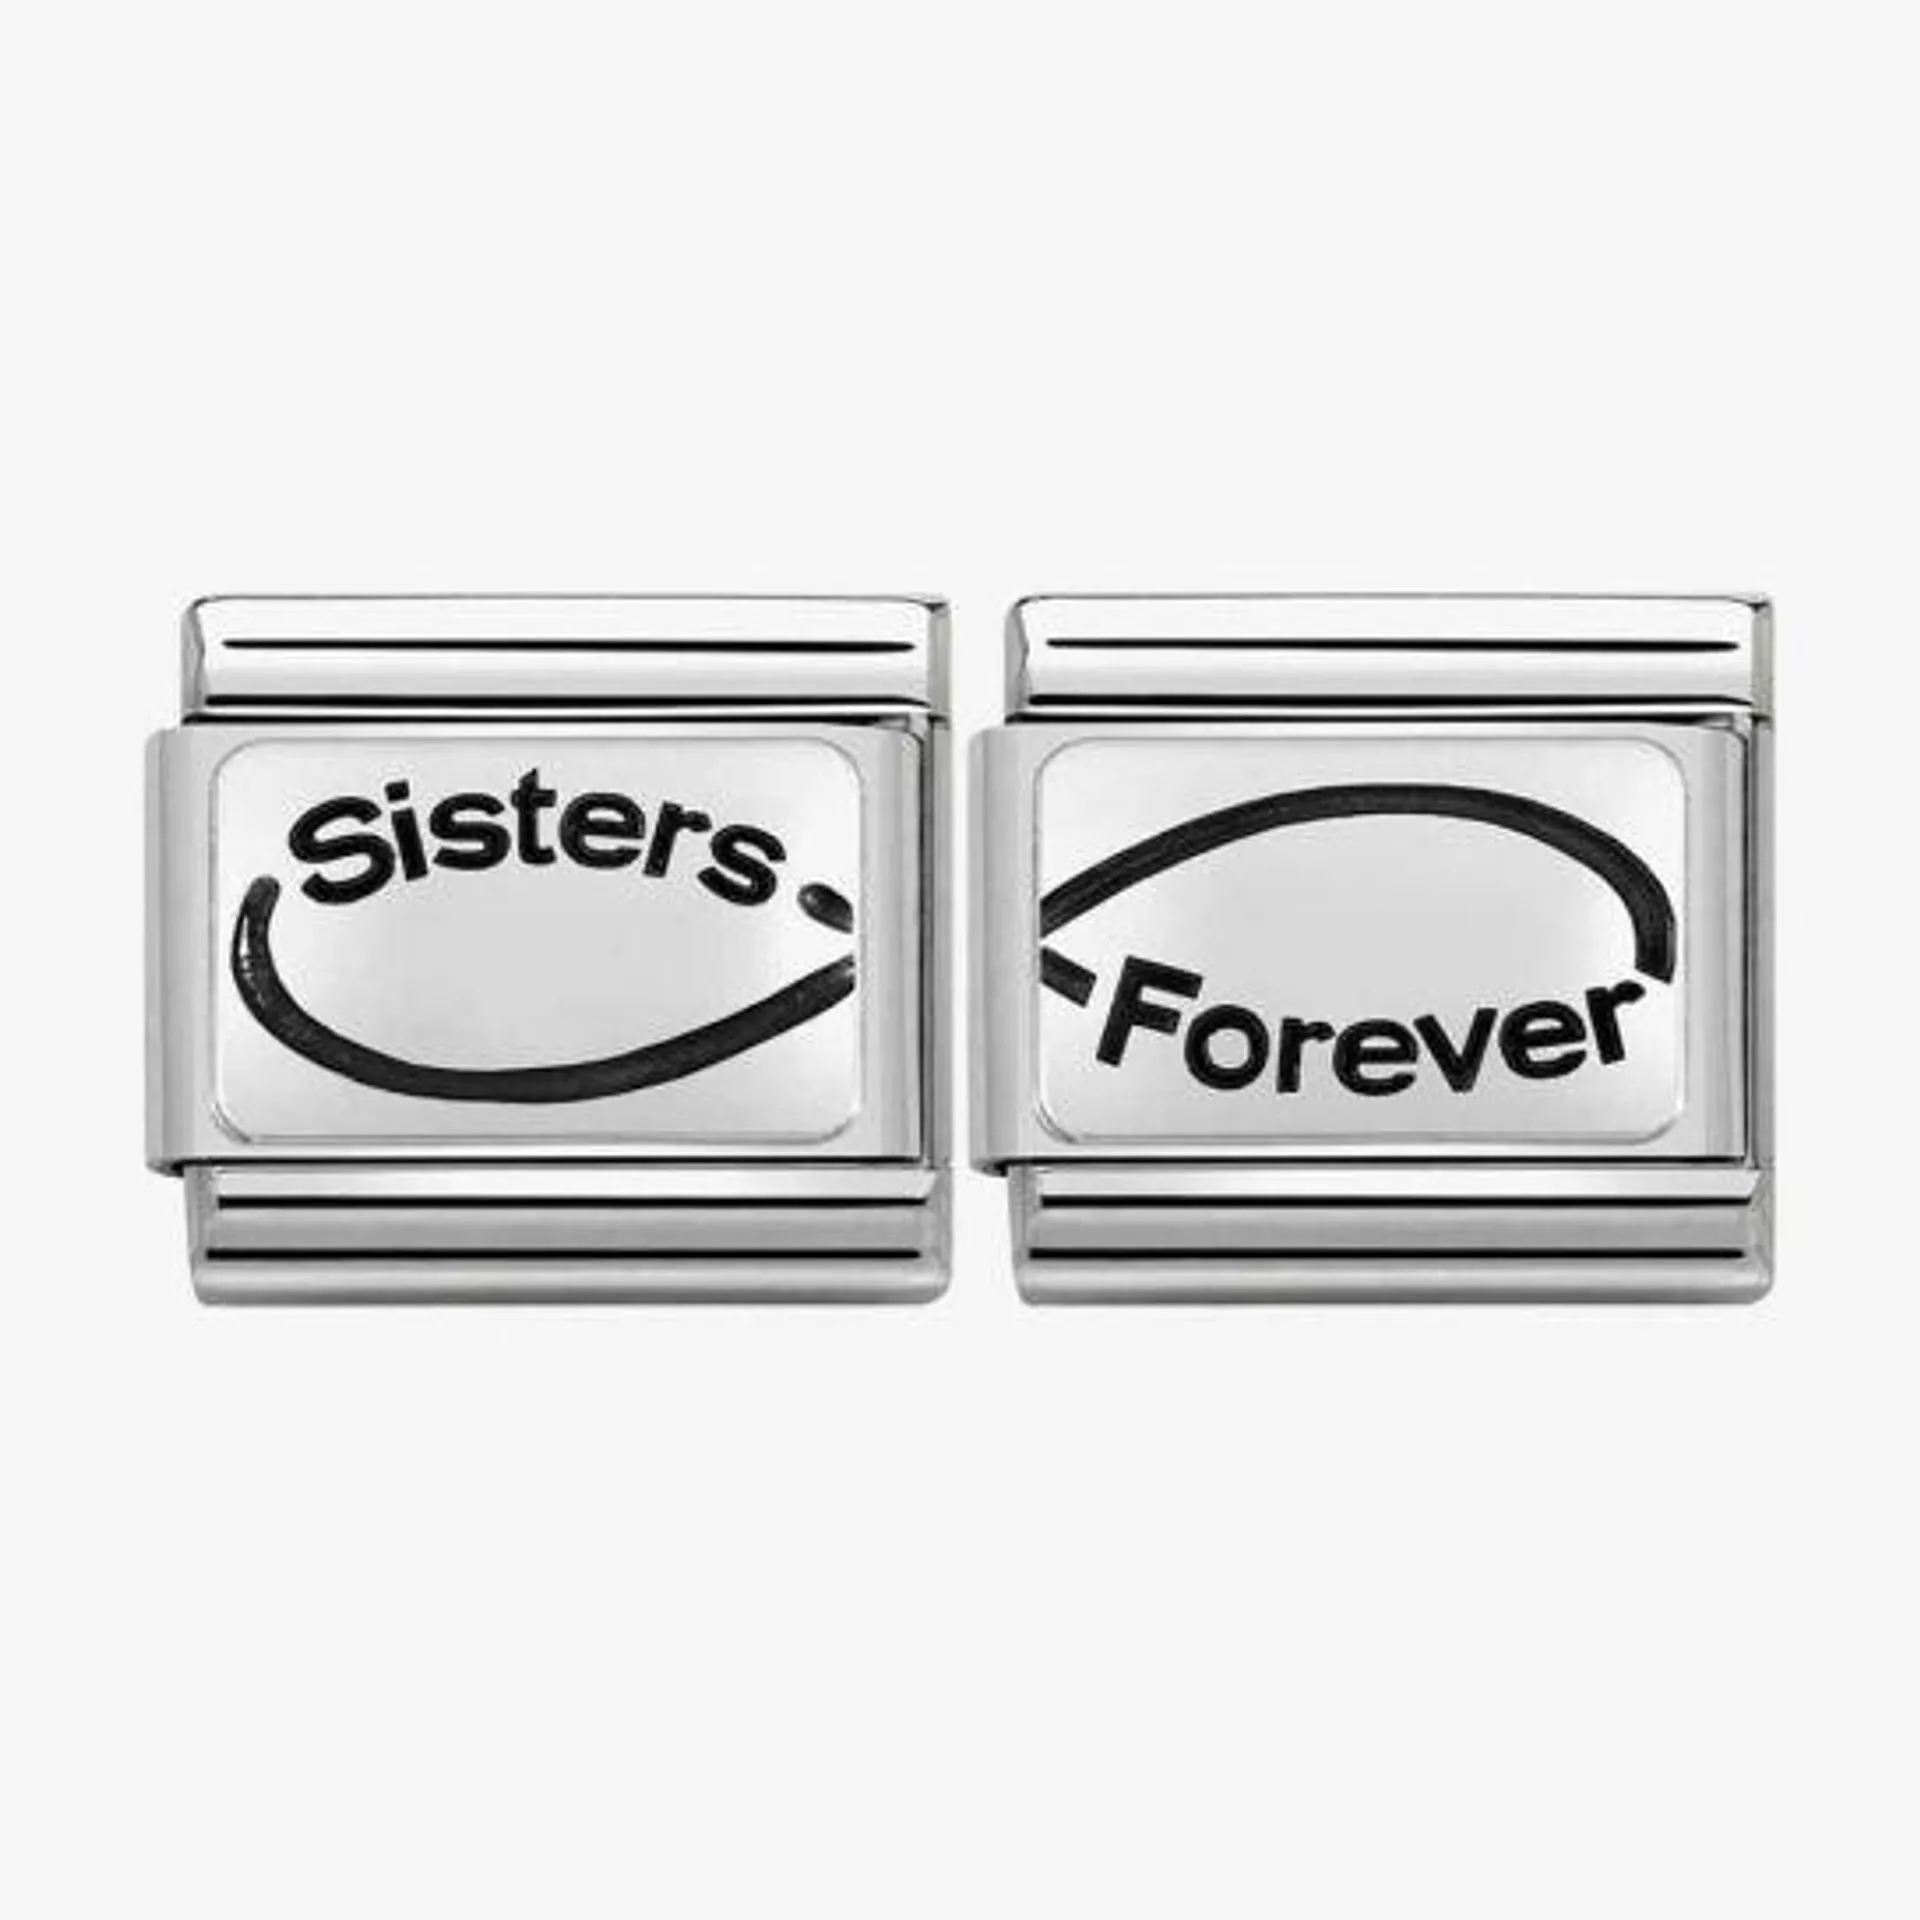 CLASSIC Silvershine Sisters Forever Infinity Bundle 330109/22+330109/23